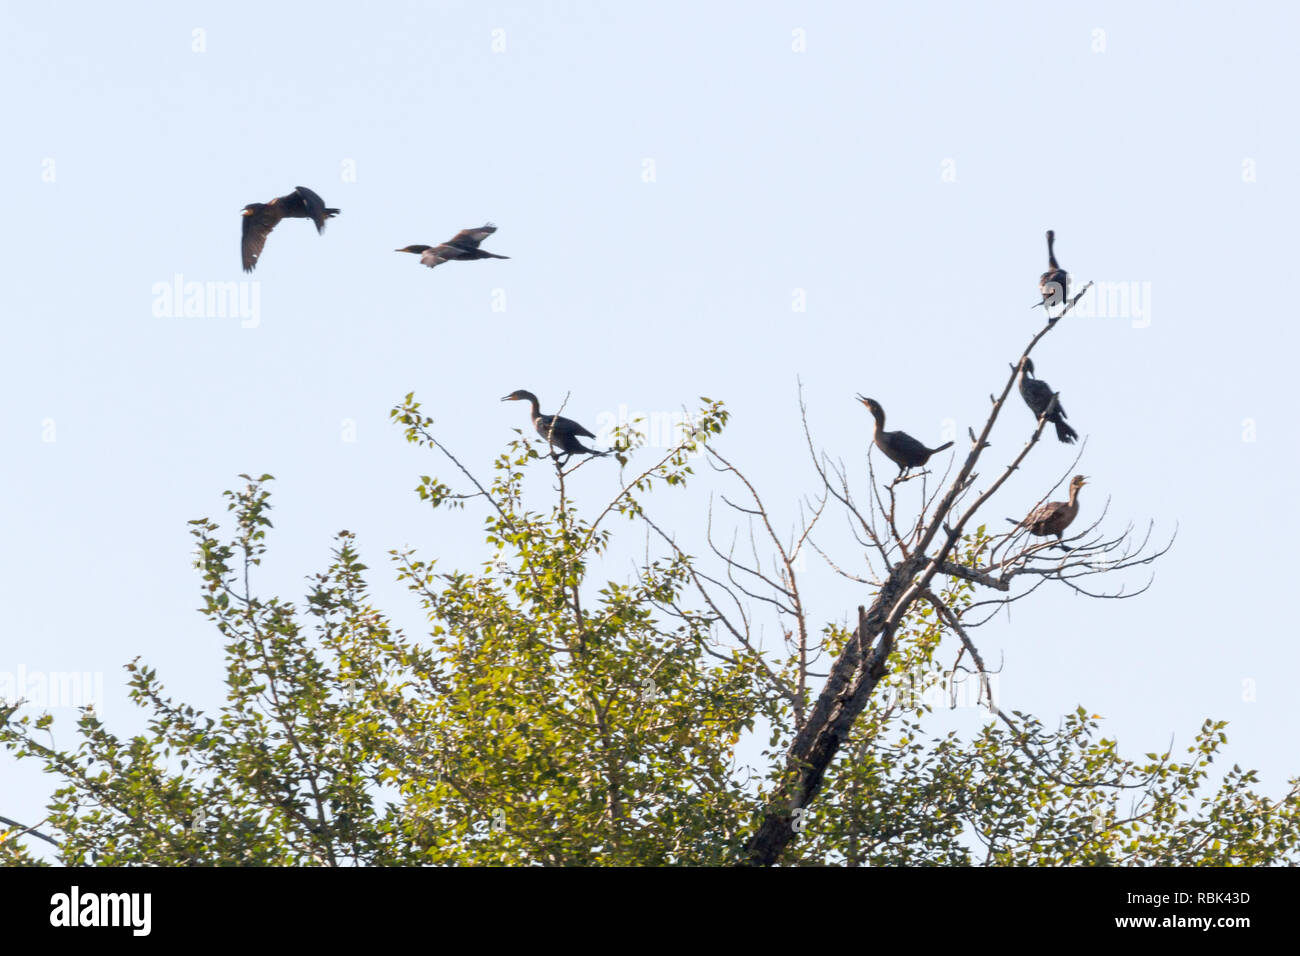 Cormorants, some flying, others perched in trees close to Bow River, where they dive for fish, on summer day in Calgary, Alberta, Canada. Stock Photo